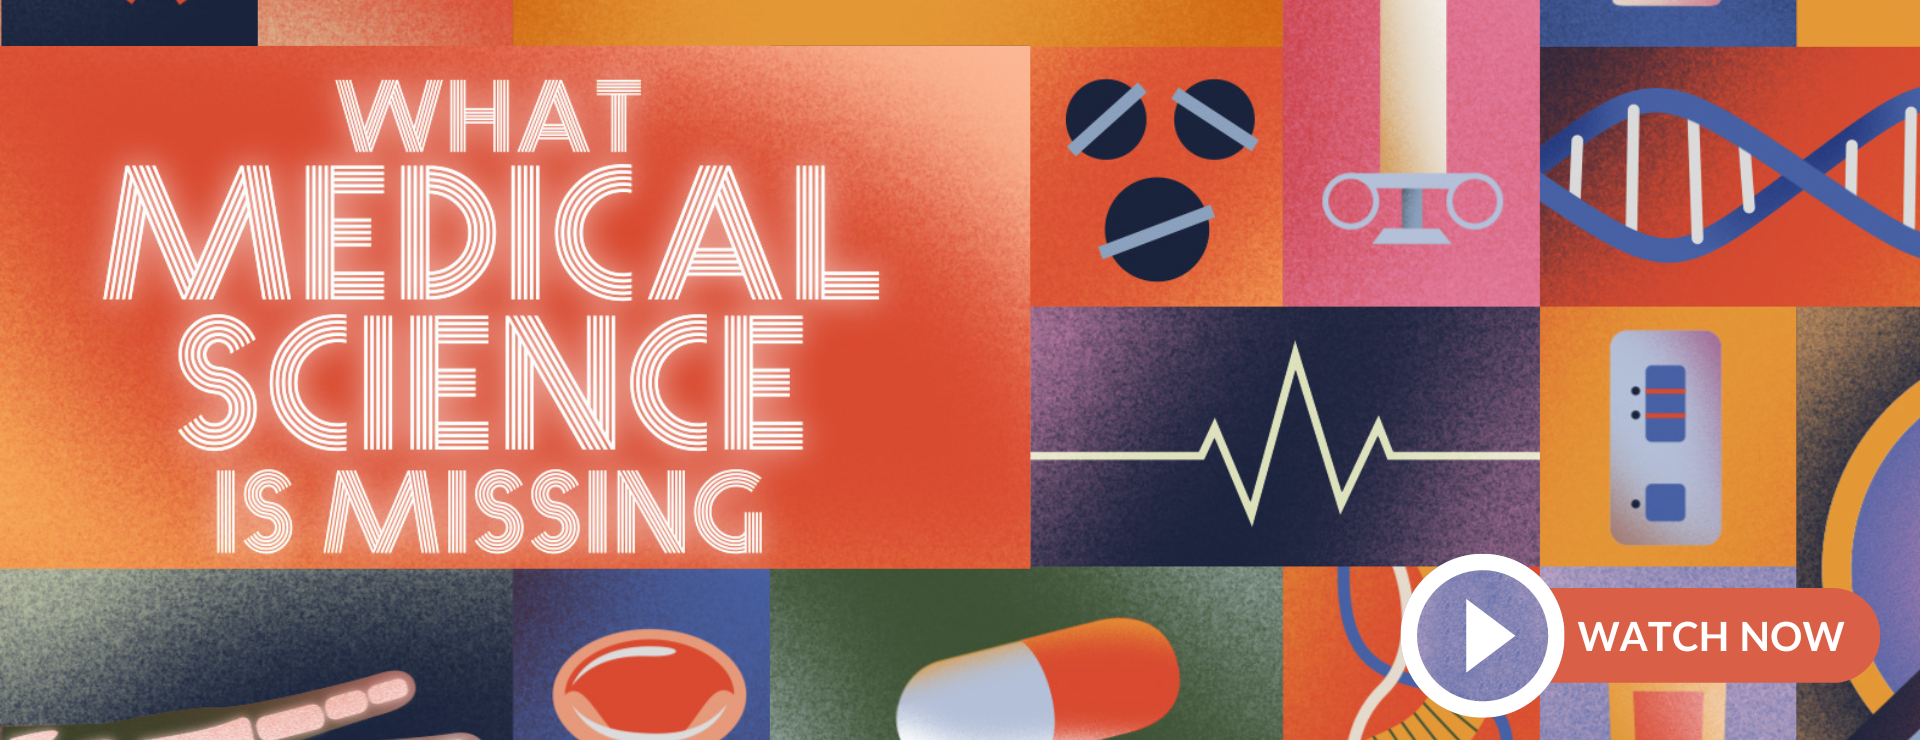 What Medical Science is Missing video illustration